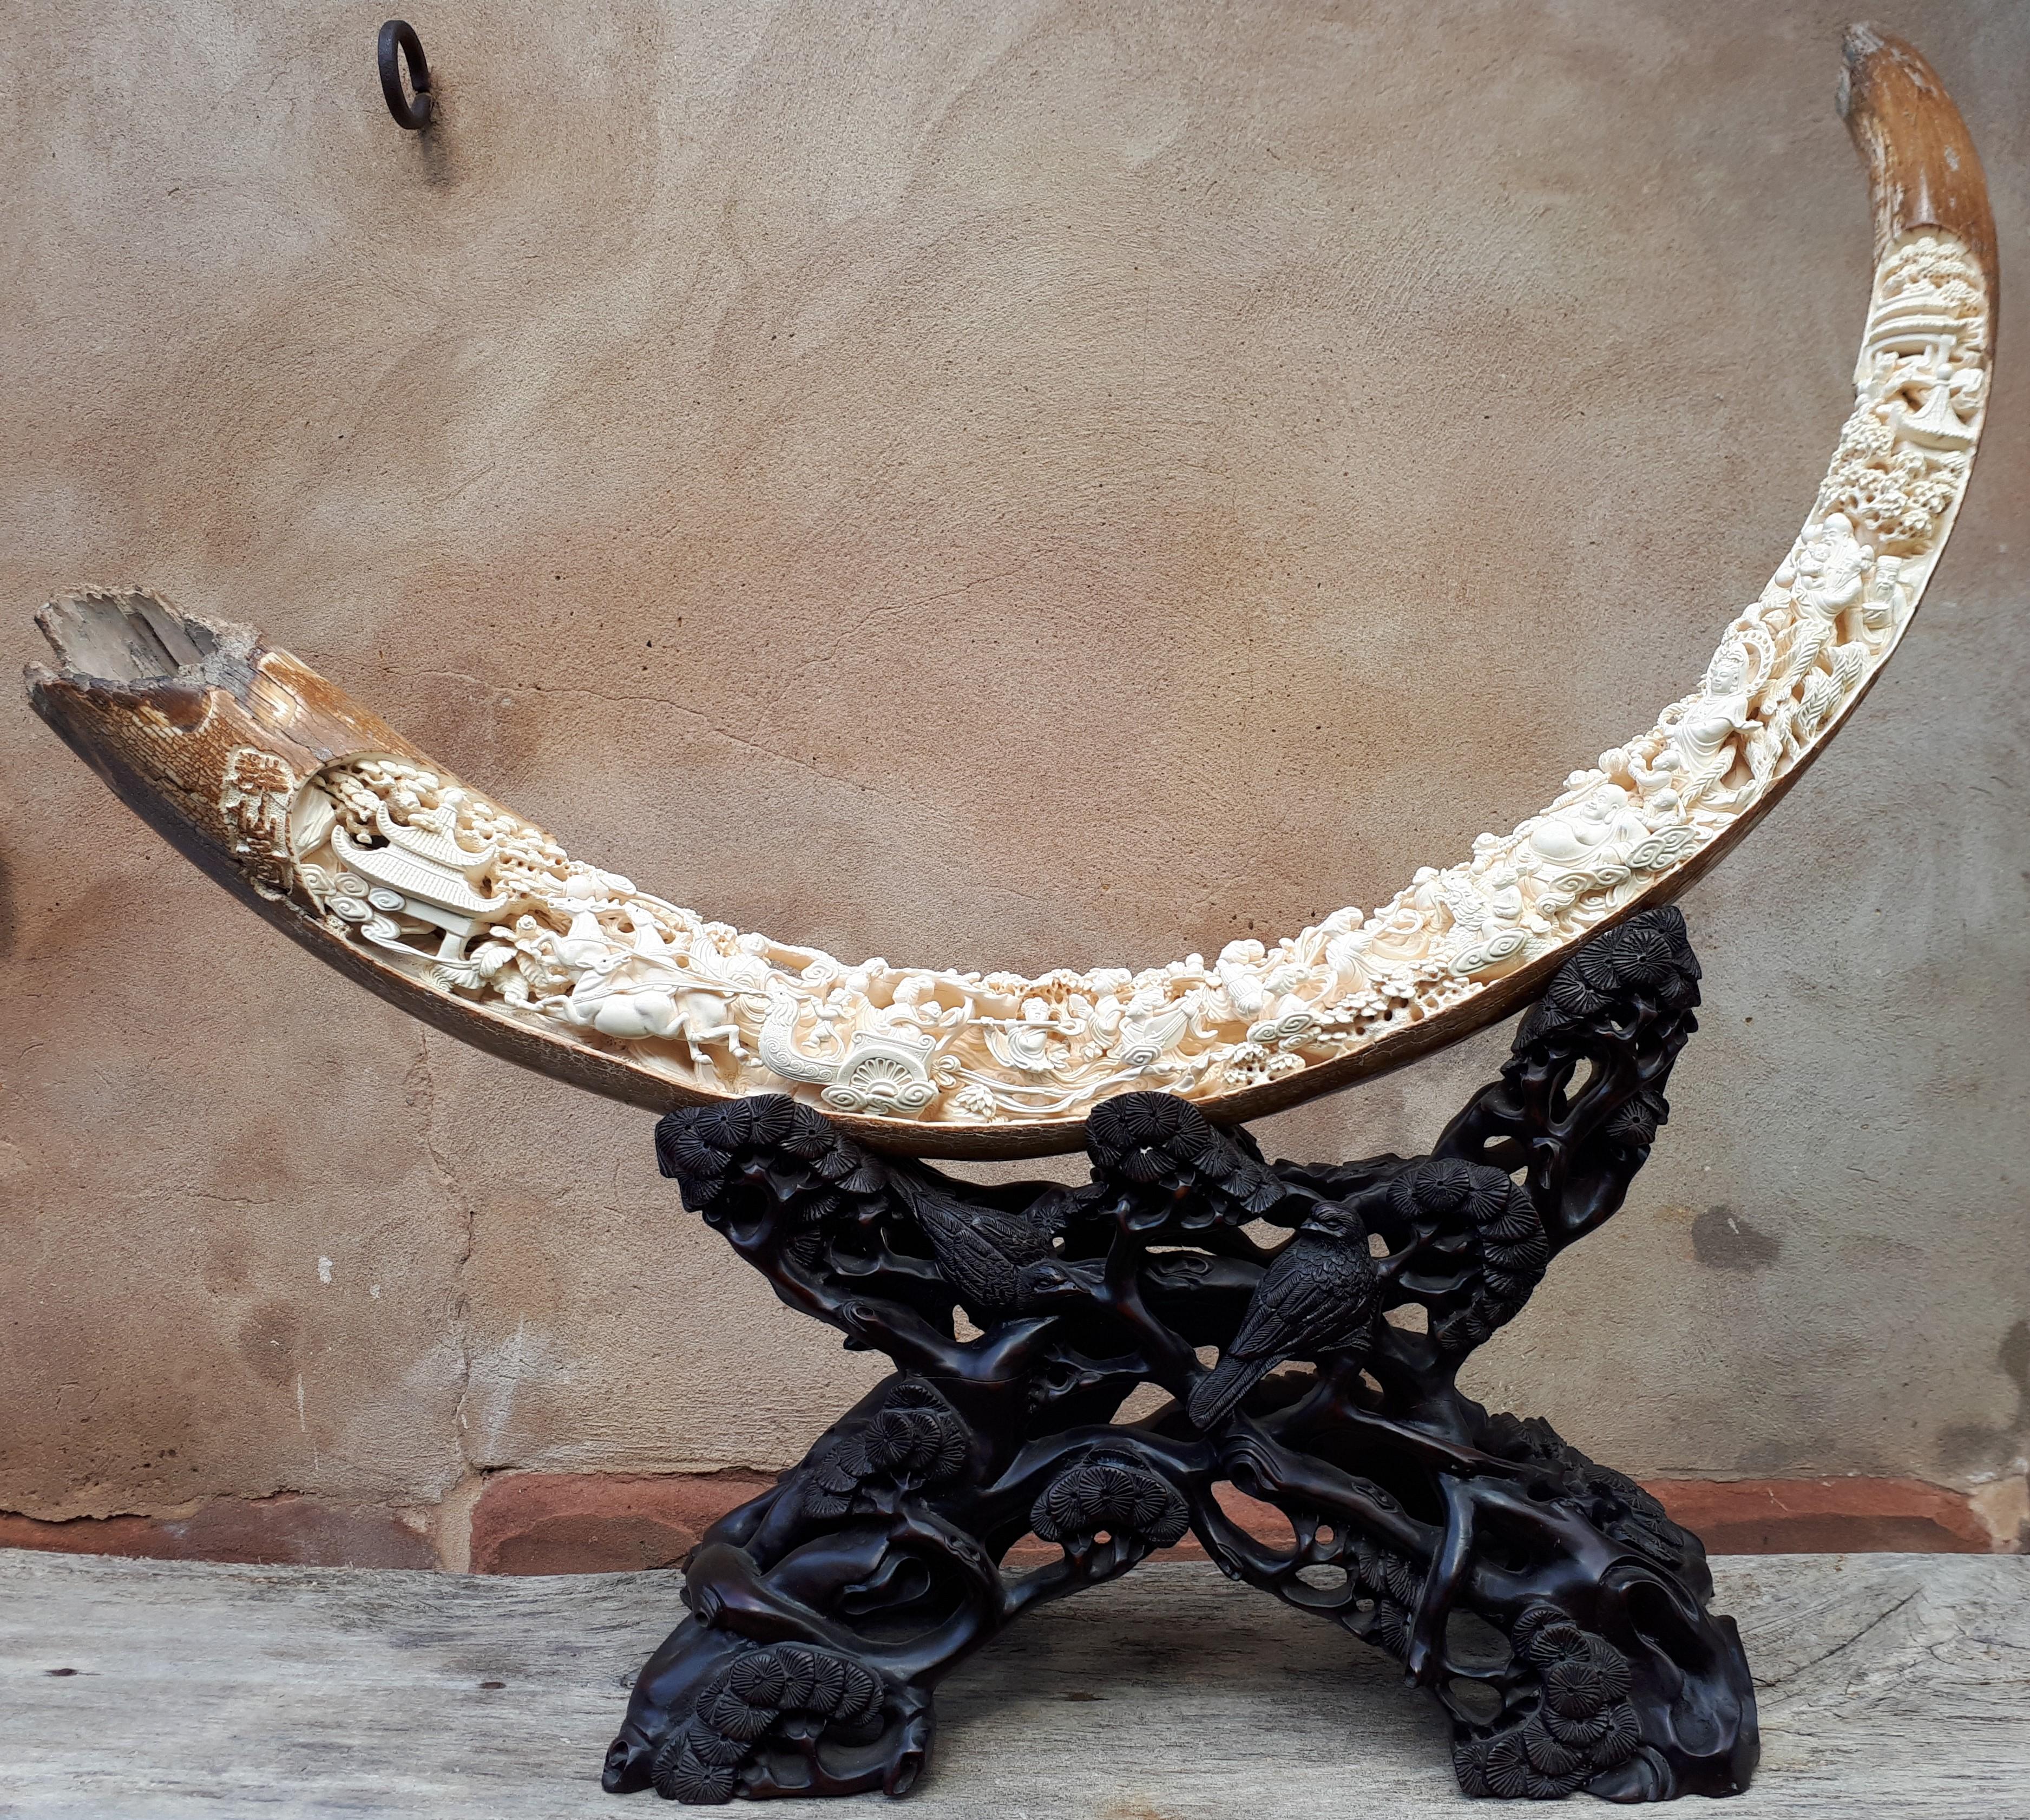 Large mammoth tusk and its wooden support, all finely hollowed out and carved.
An exceptional piece that will delight any collector of Asian art. Much more impressive in real life than in photos !
Length of curve of mammoth tusk : 147 cm.

The